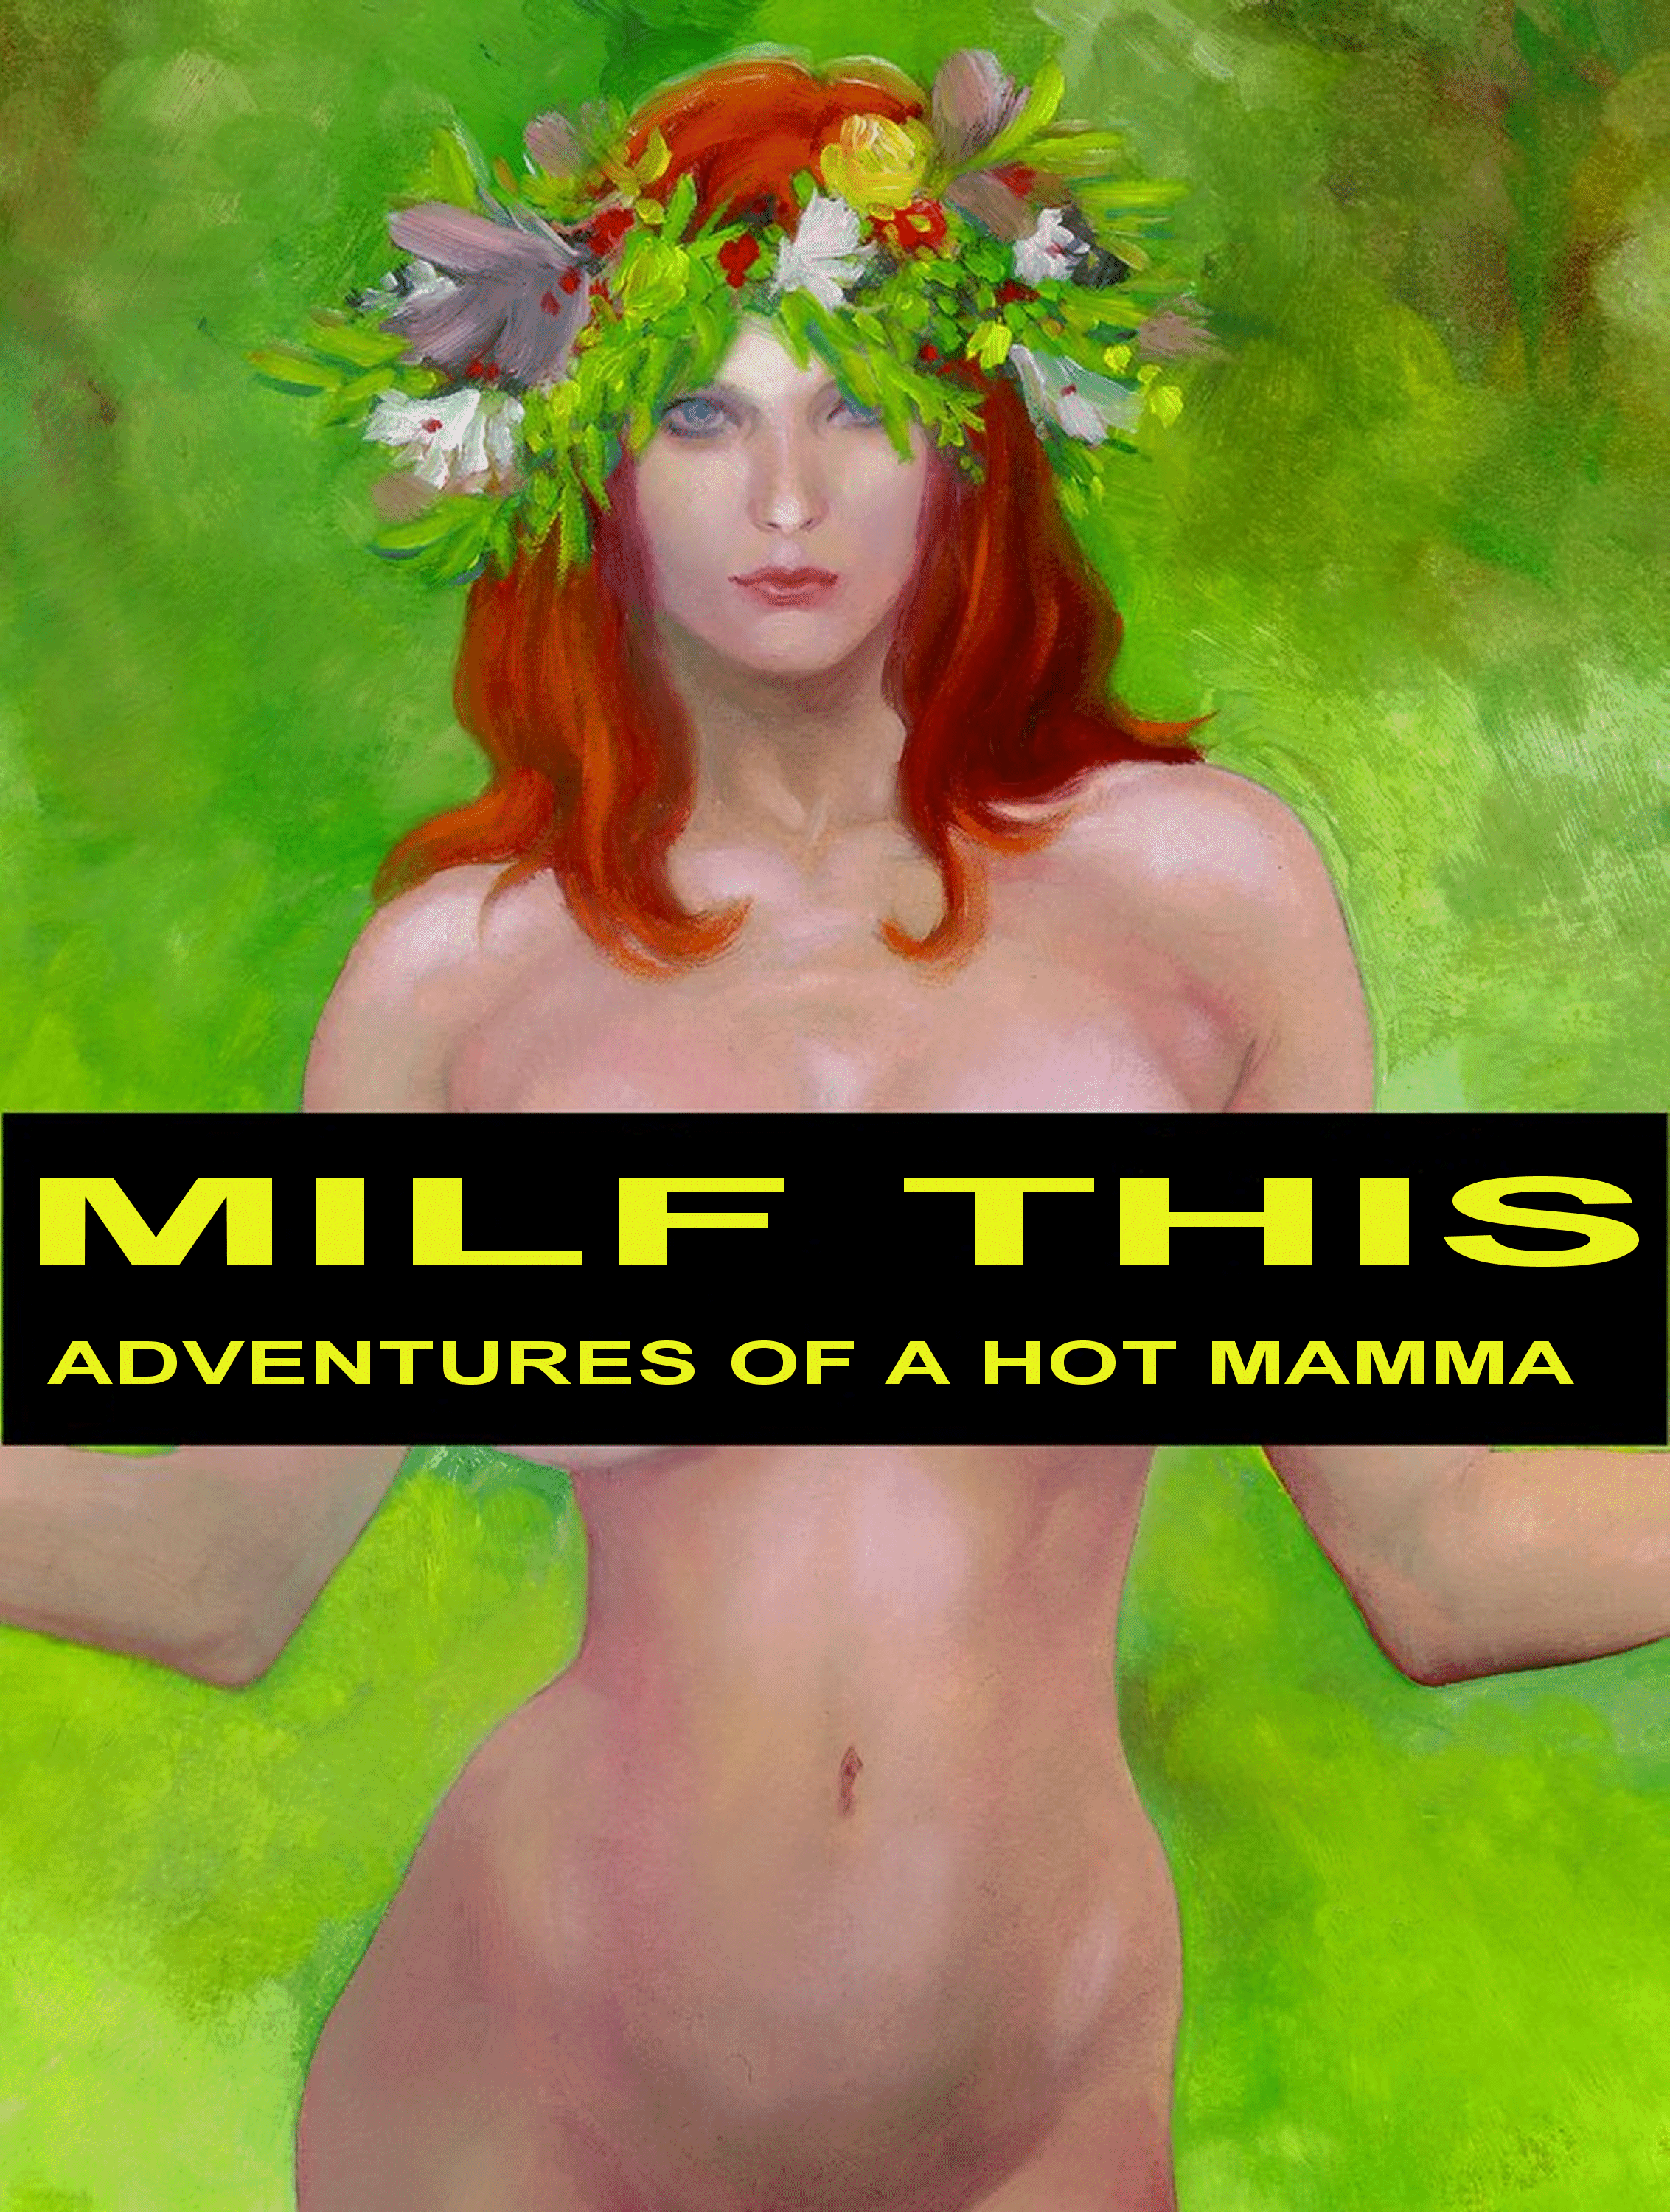 MILF THIS! OLD SAMPLE COVER